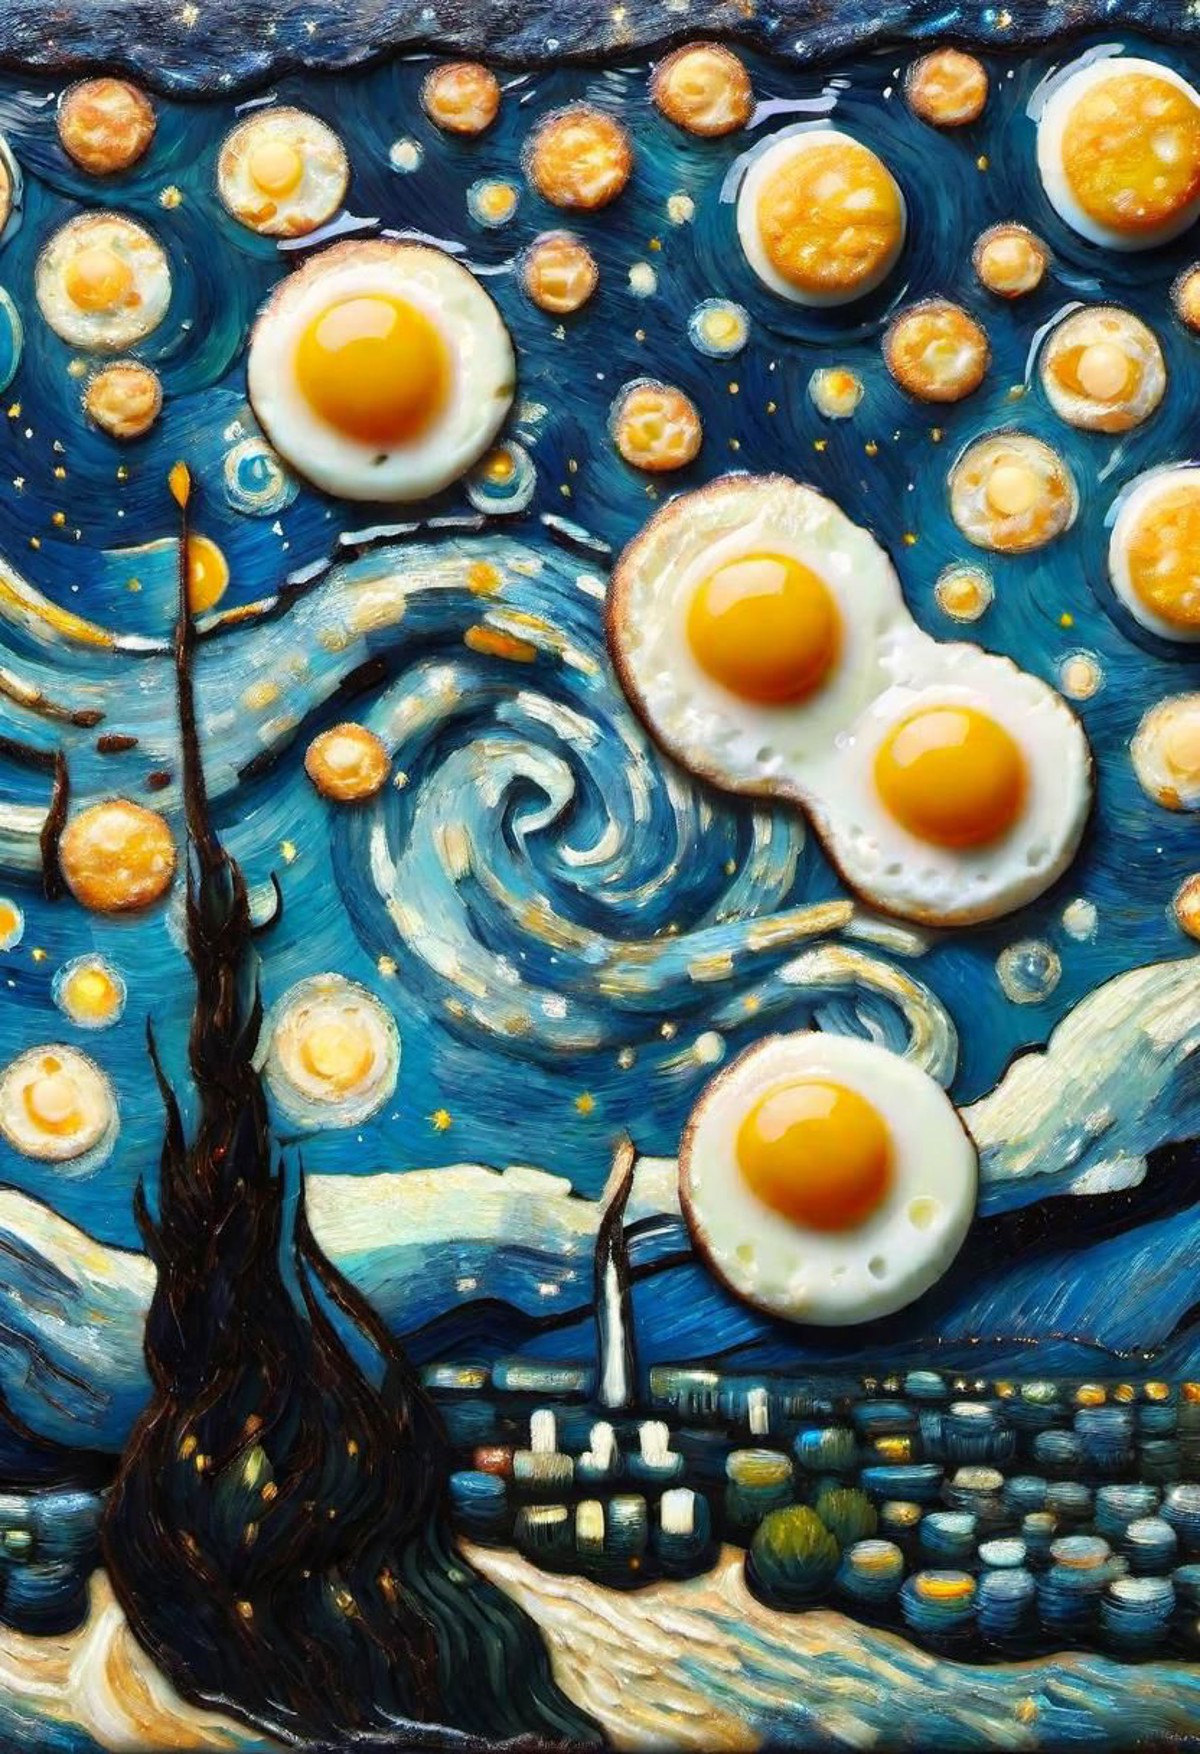 ral-friedegg, Starry Night by Vincent Van Gogh